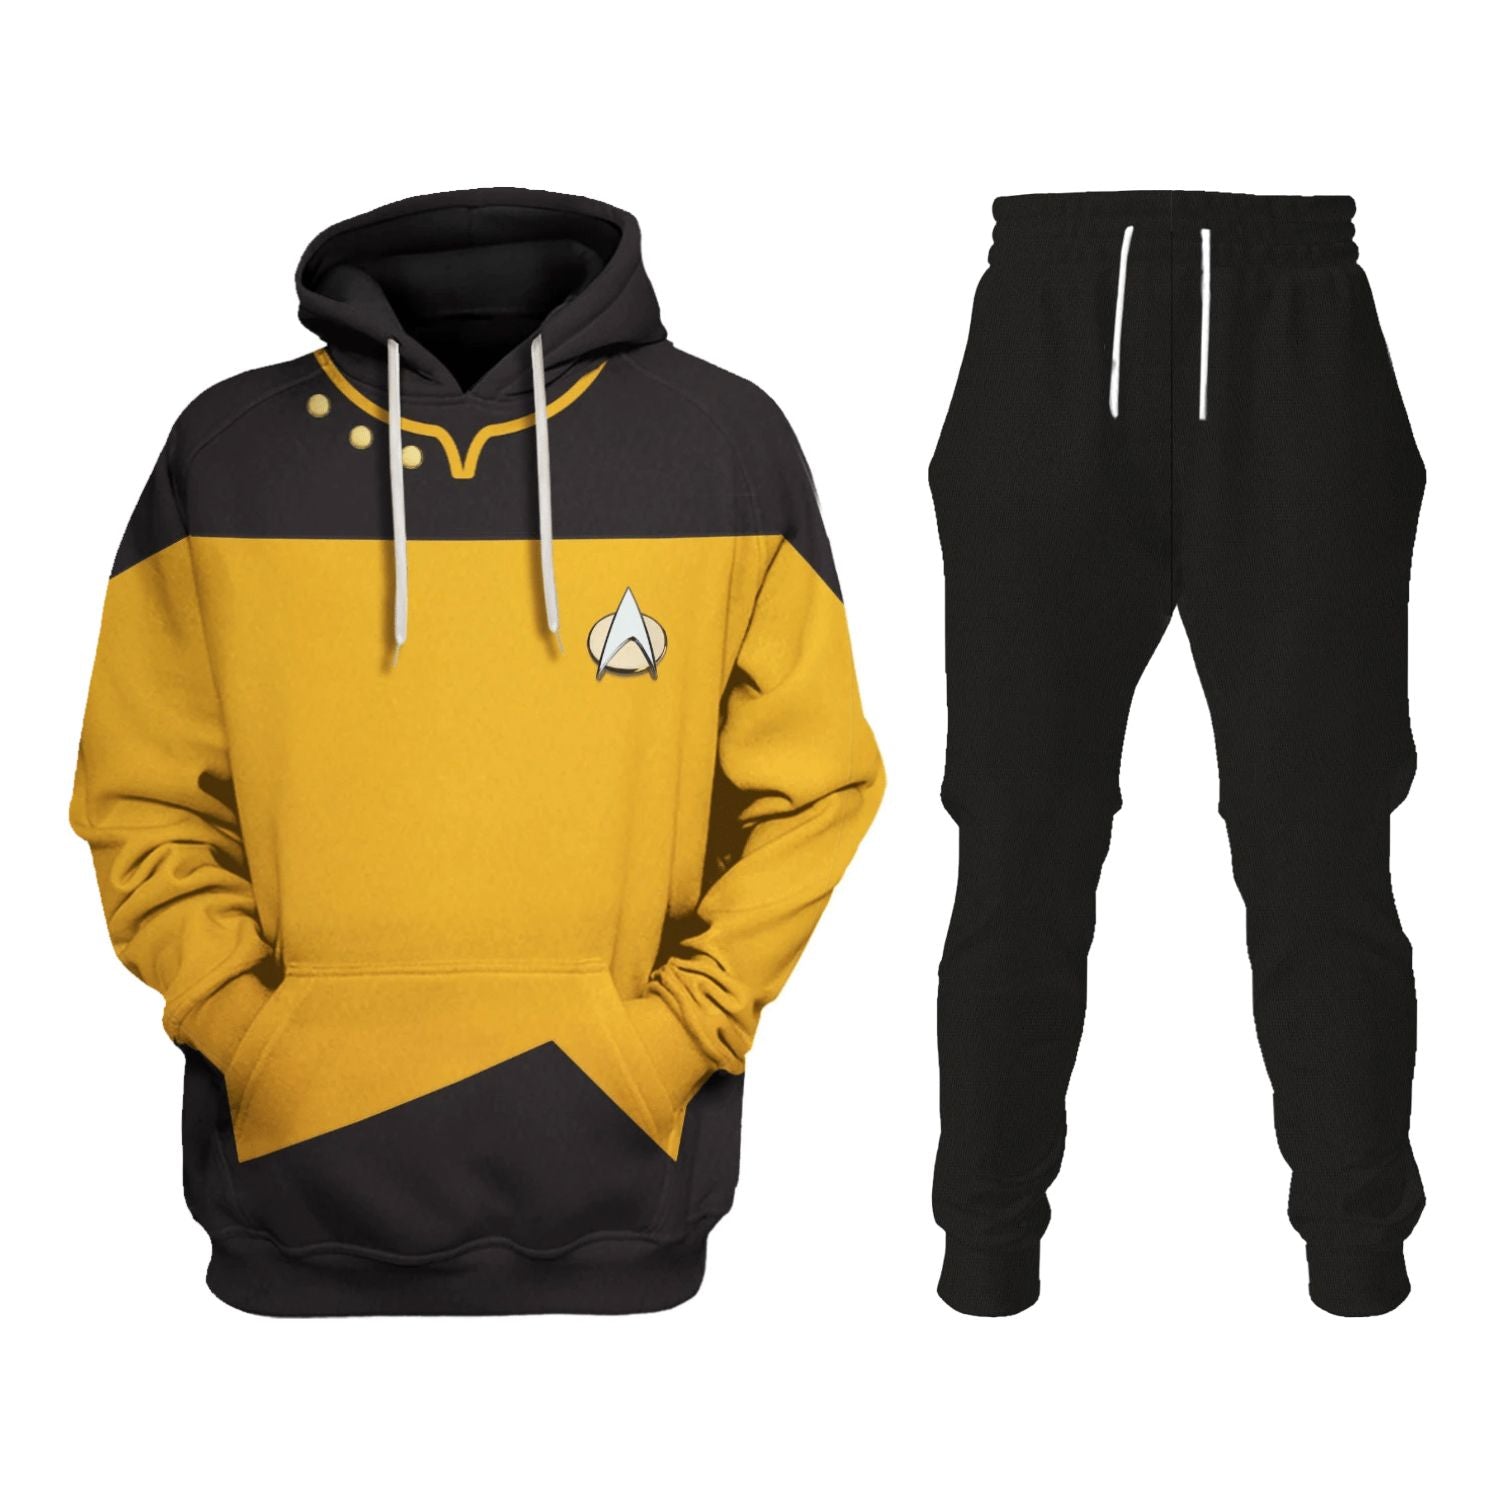 The Next Generation Yellow track suit 